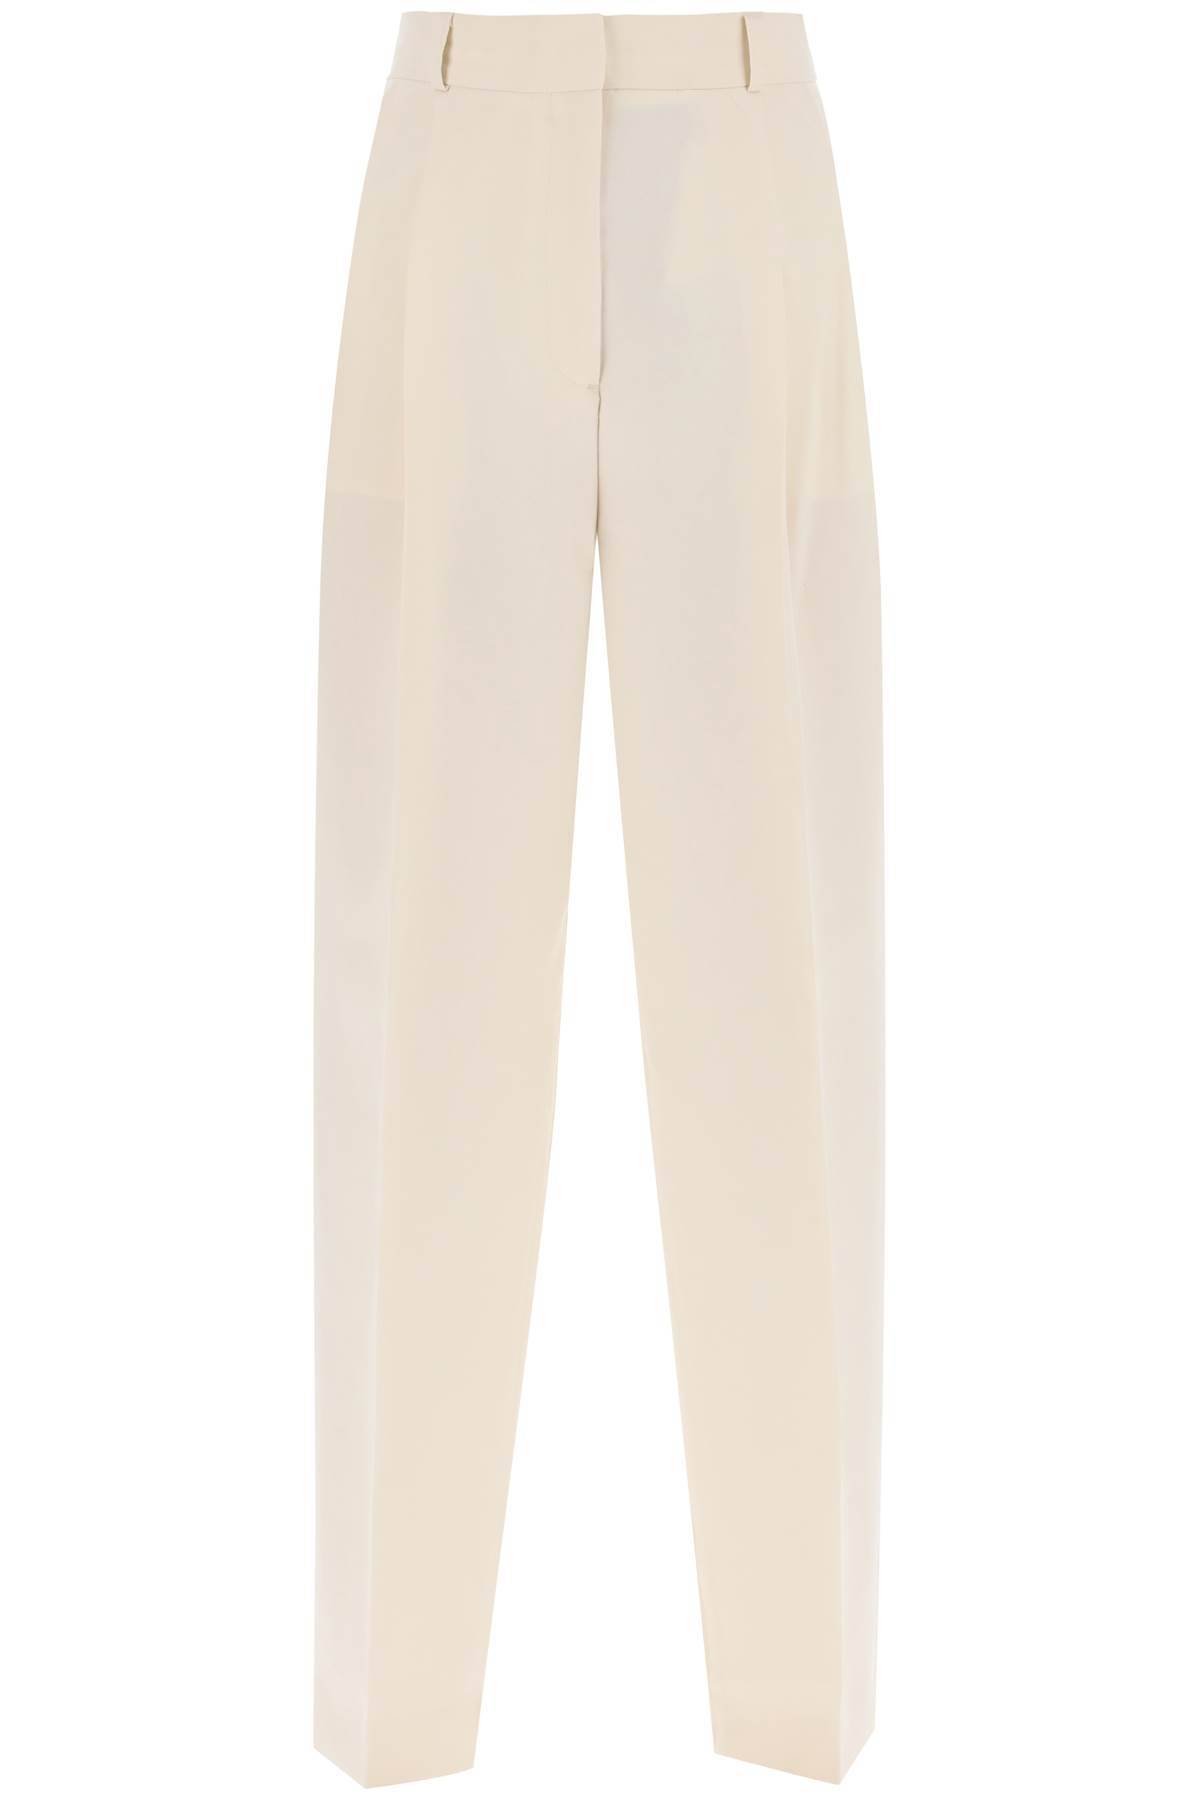 Toteme TOTEME double-pleated viscose trousers